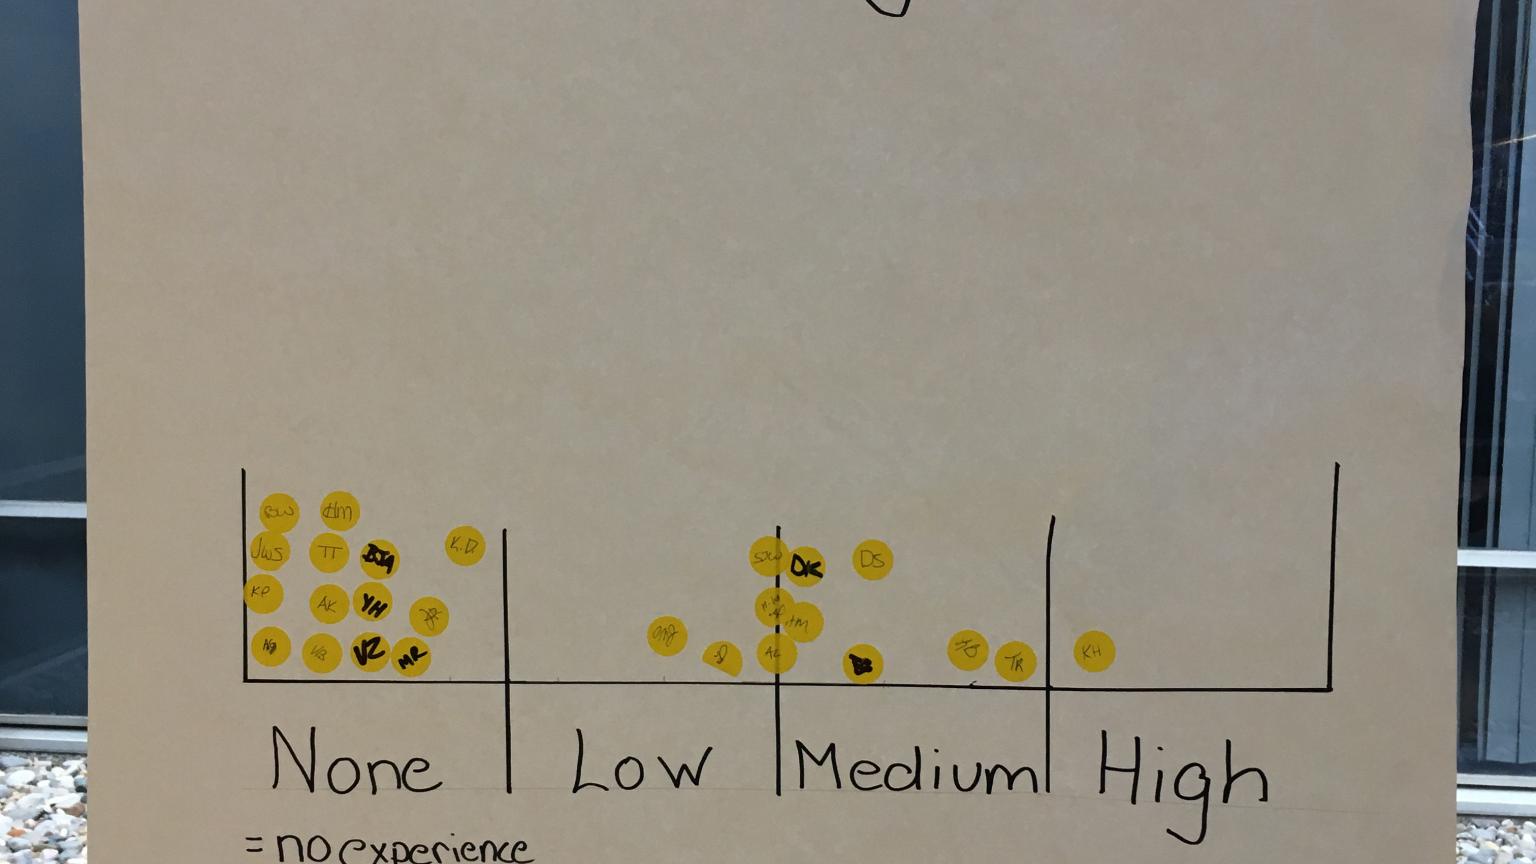 A picture of a poster that reads "Comfort Level With Creating A3s" along with a scale that ranges from None to High and yellow dots where people indicated their level. None is highest and one person is in High. 